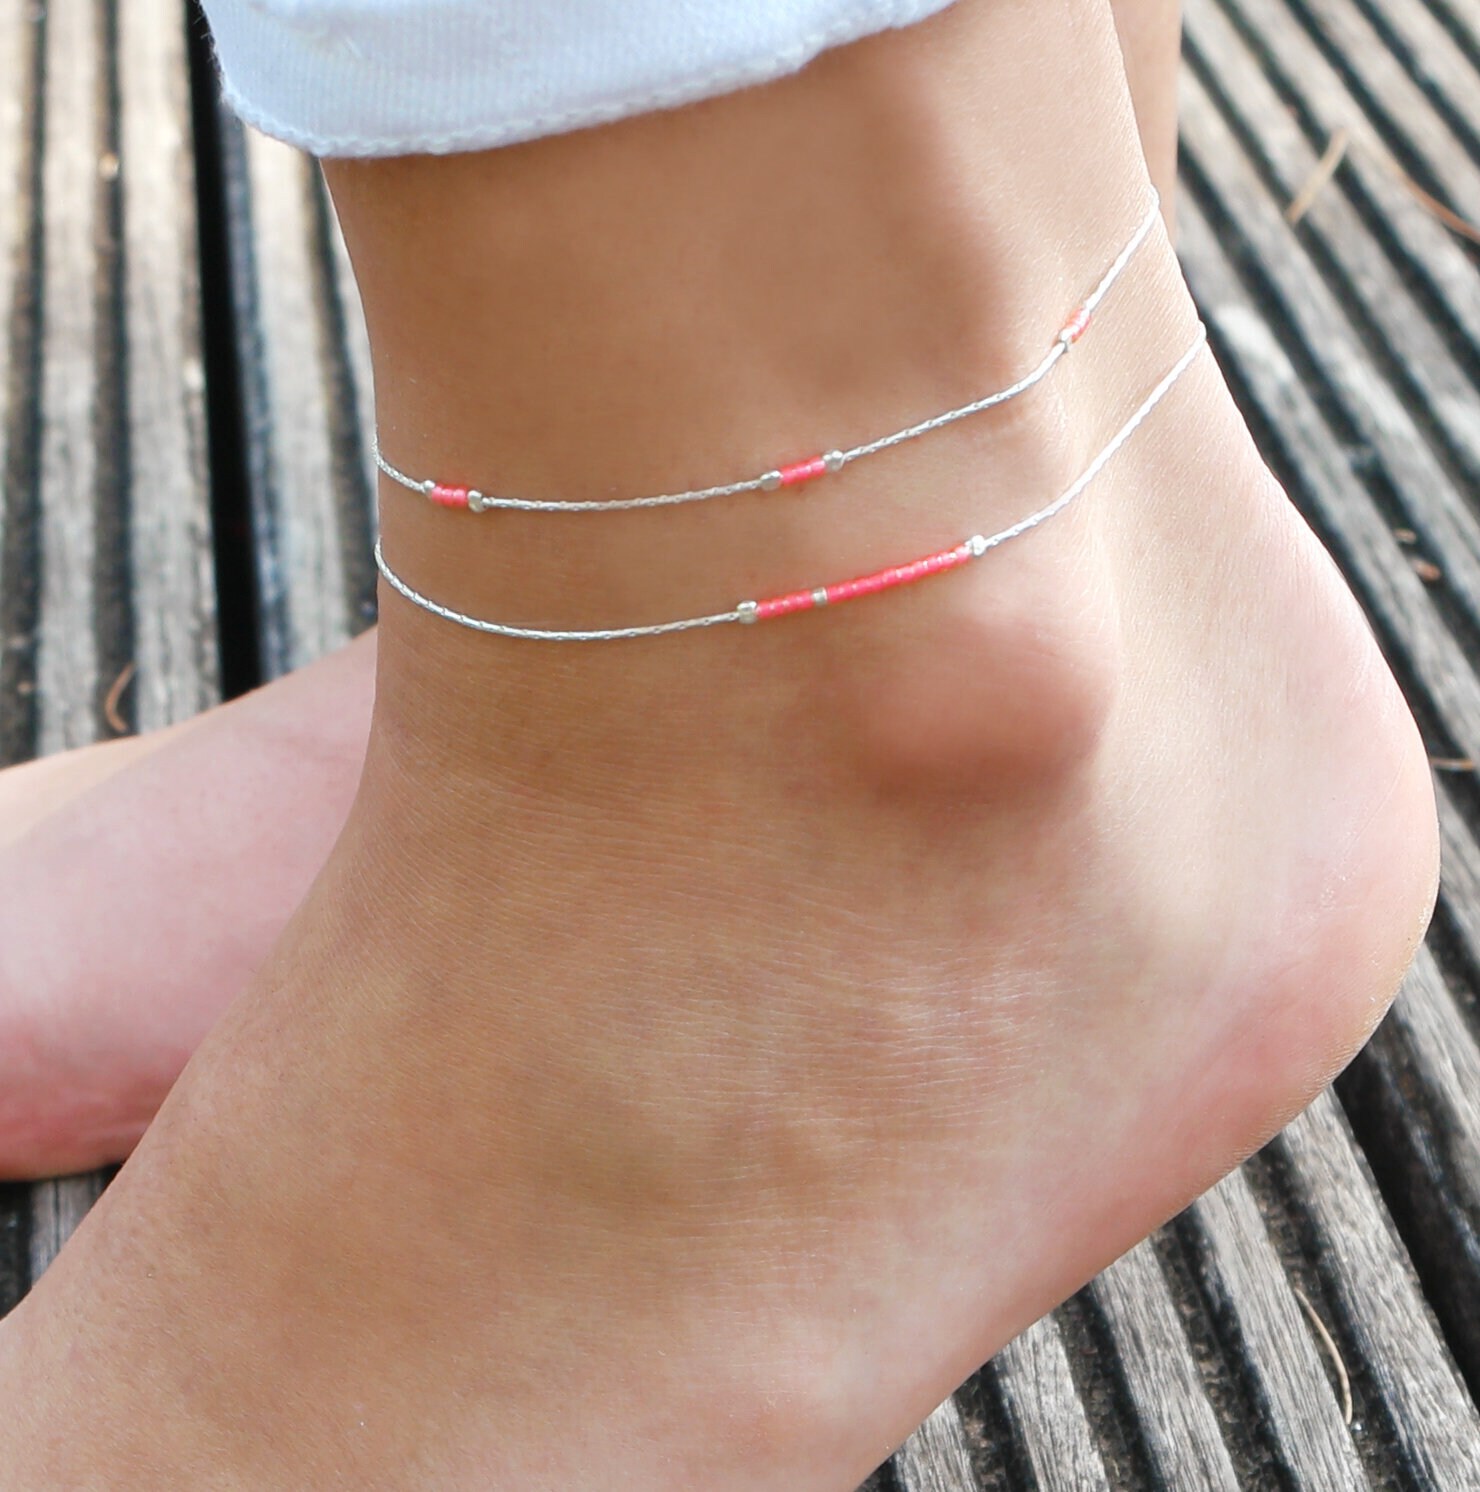 Silver Anklet Bracelet for women Dainty Beaded simple boho ankle jewelry  Indian — Discovered